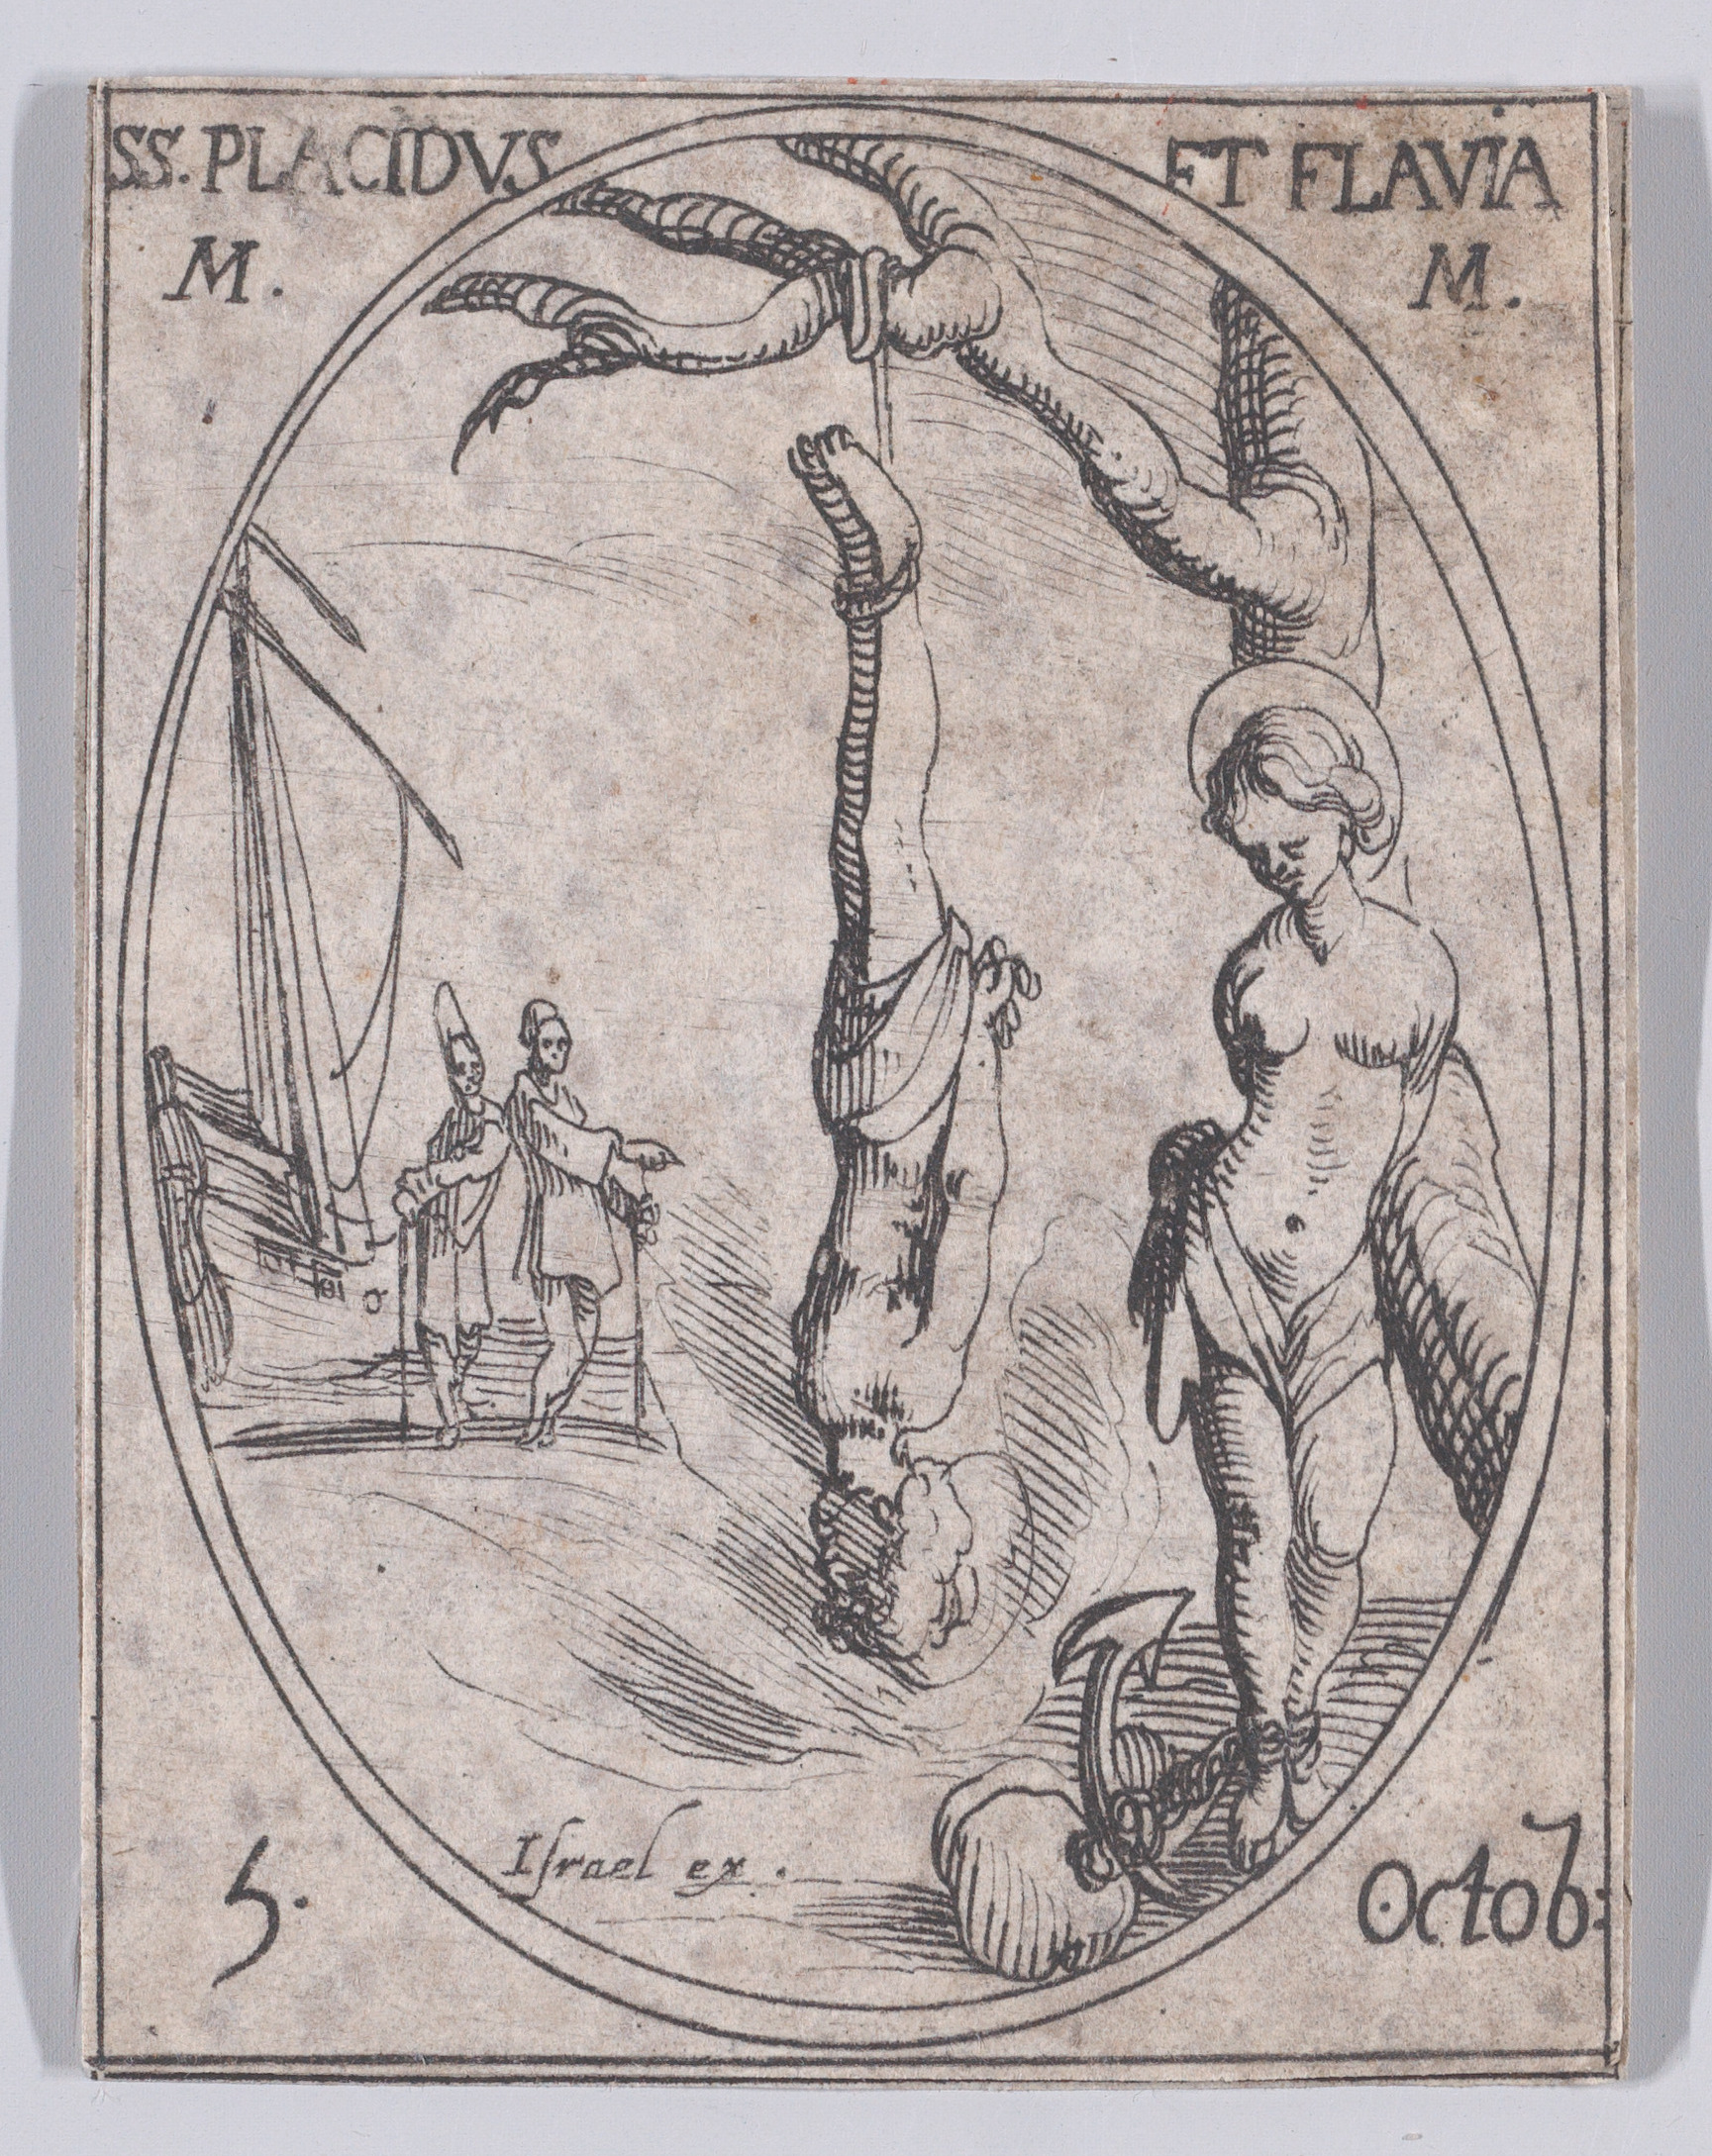 Ste. Placide et Ste. Flavie, martyres (St. Placid and St. Flavia, Martyrs), October 5th, from Les Images De Tous Les Saincts et Saintes de L'Année (Images of All of the Saints and Religious Events of the Year), Jacques Callot (French, Nancy 1592–1635 Nancy), Etching; second state of two (Lieure)